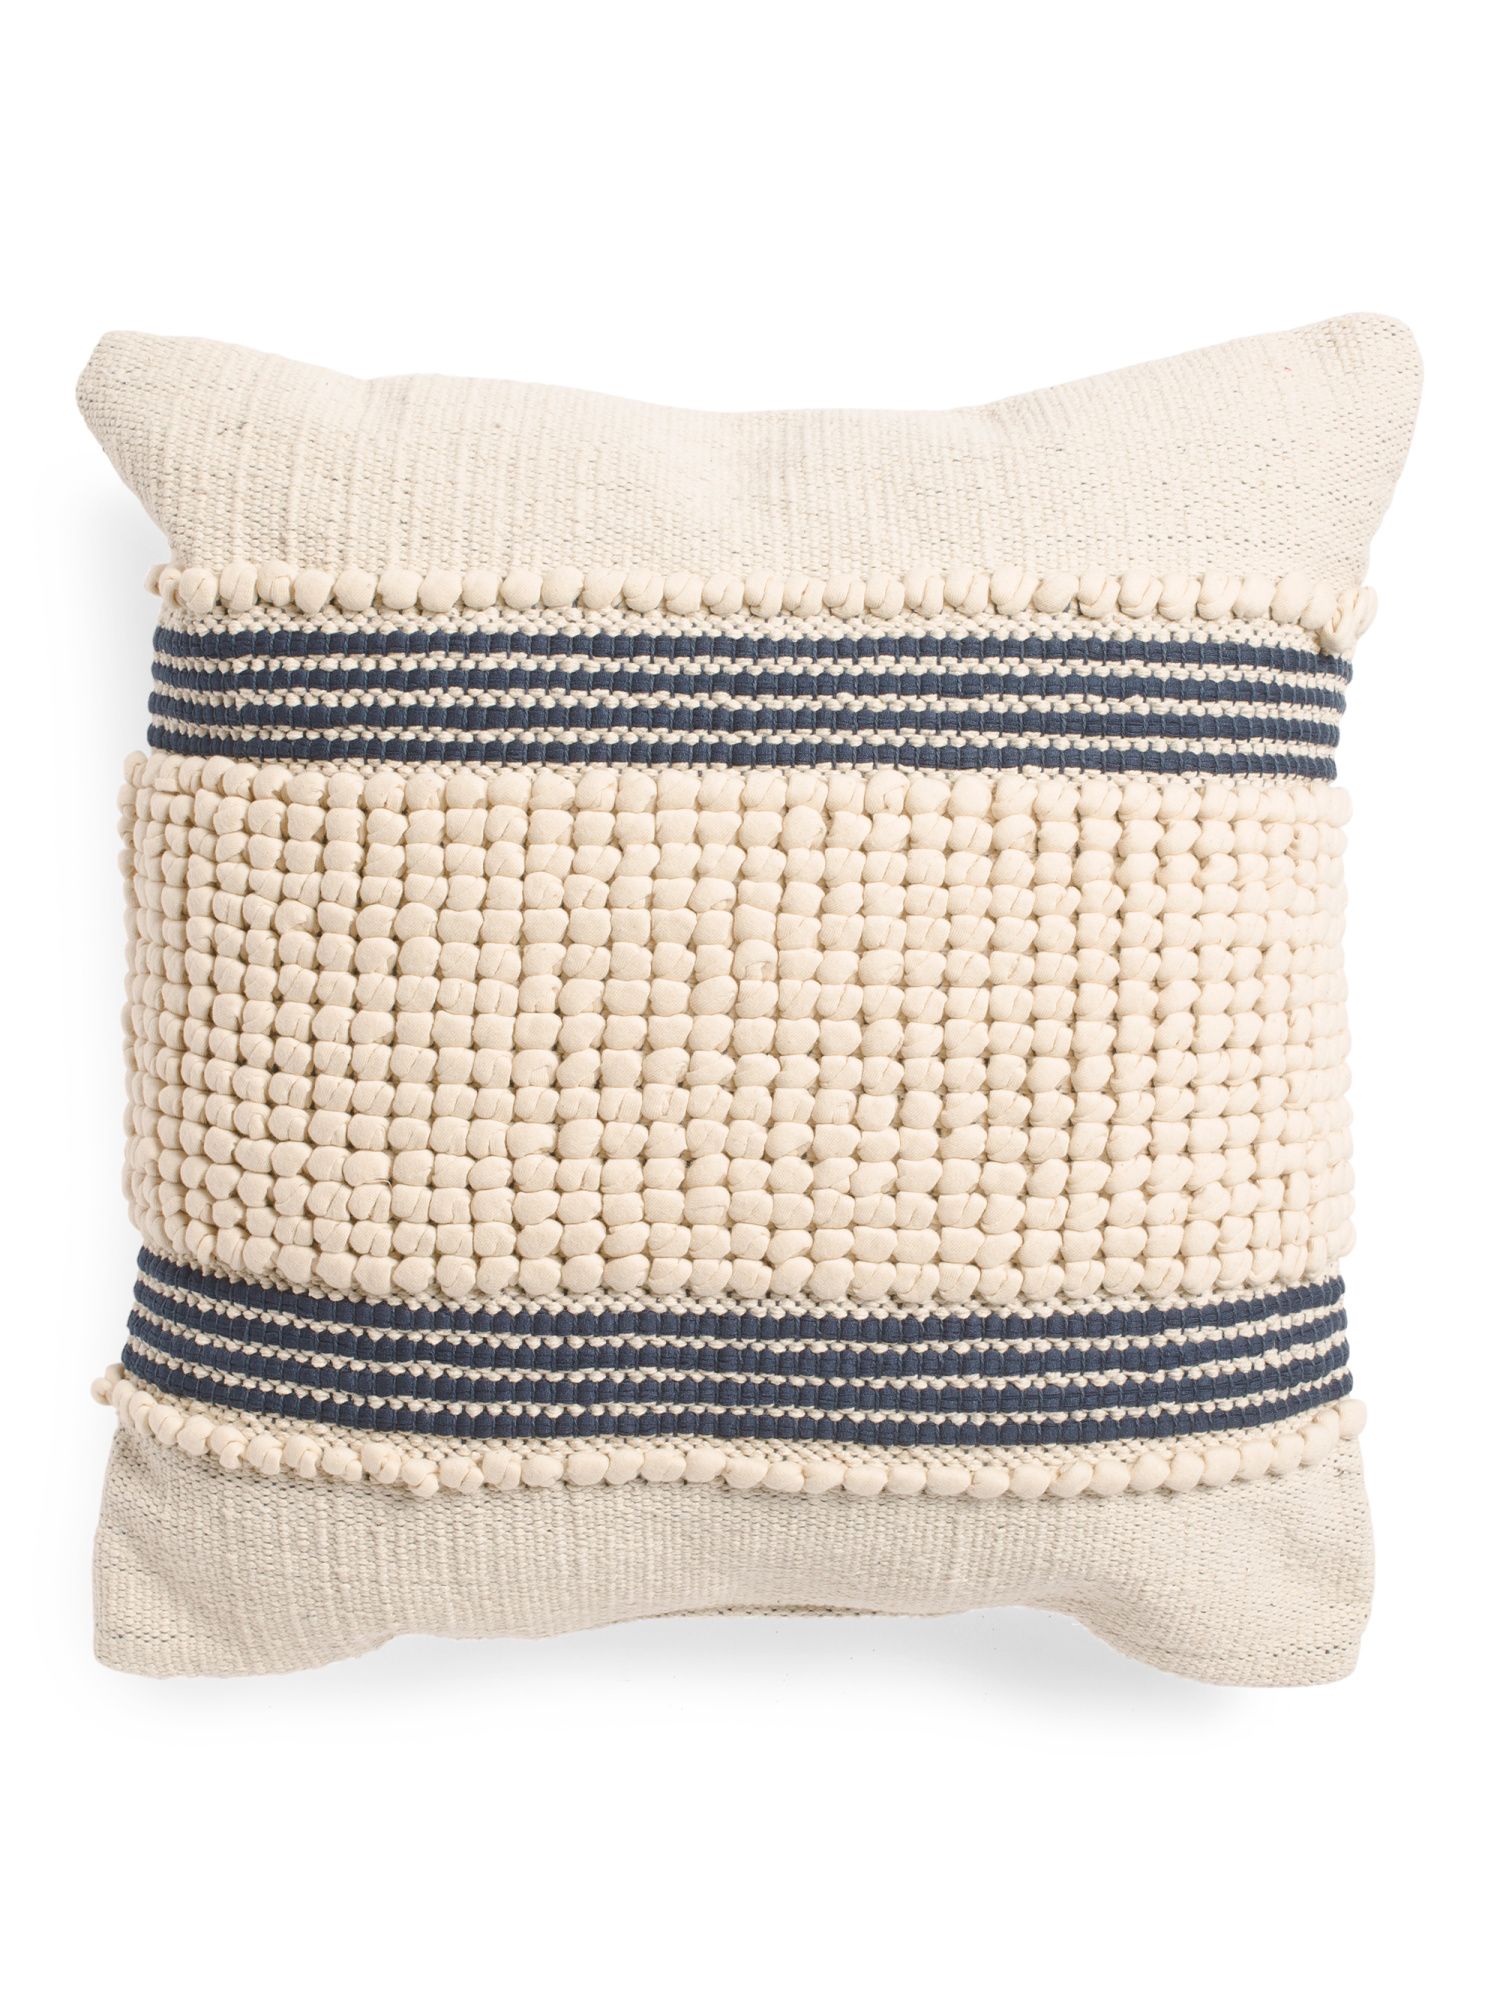 Made In India 20x20 Clyde Textured Pillow | TJ Maxx